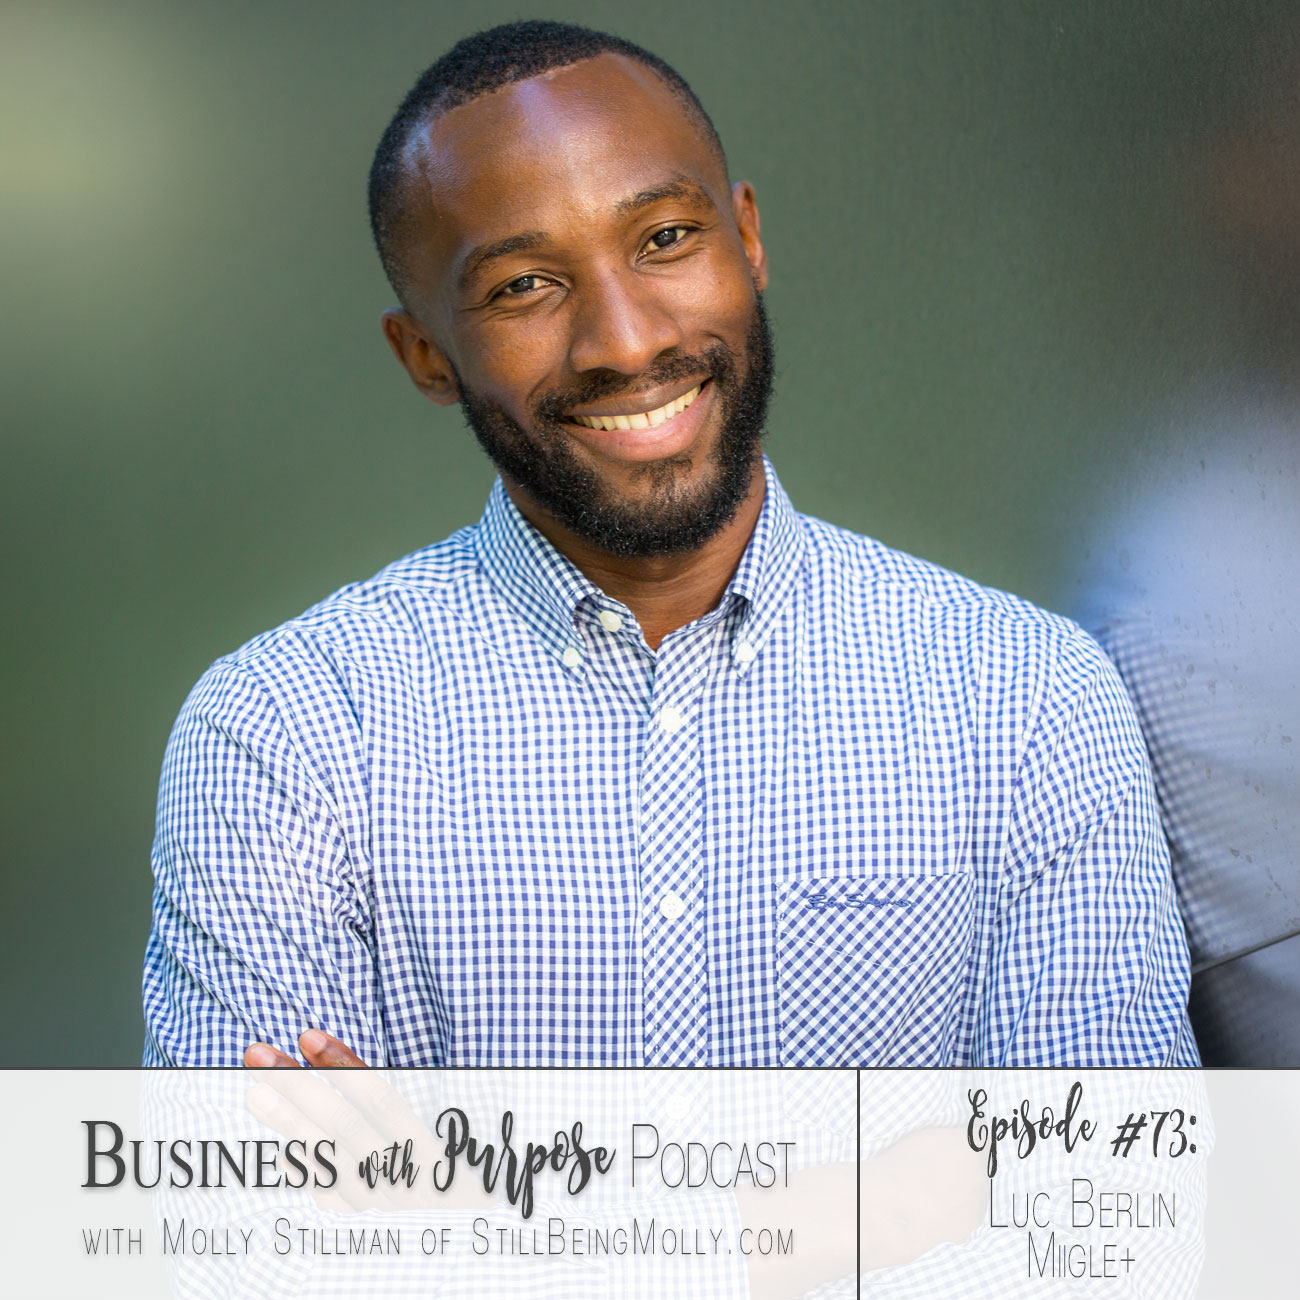 Business with Purpose Podcast EP 73: Luc Berlin, Founder of Miigle+ by popular North Carolina ethical blogger and podcaster Still Being Molly